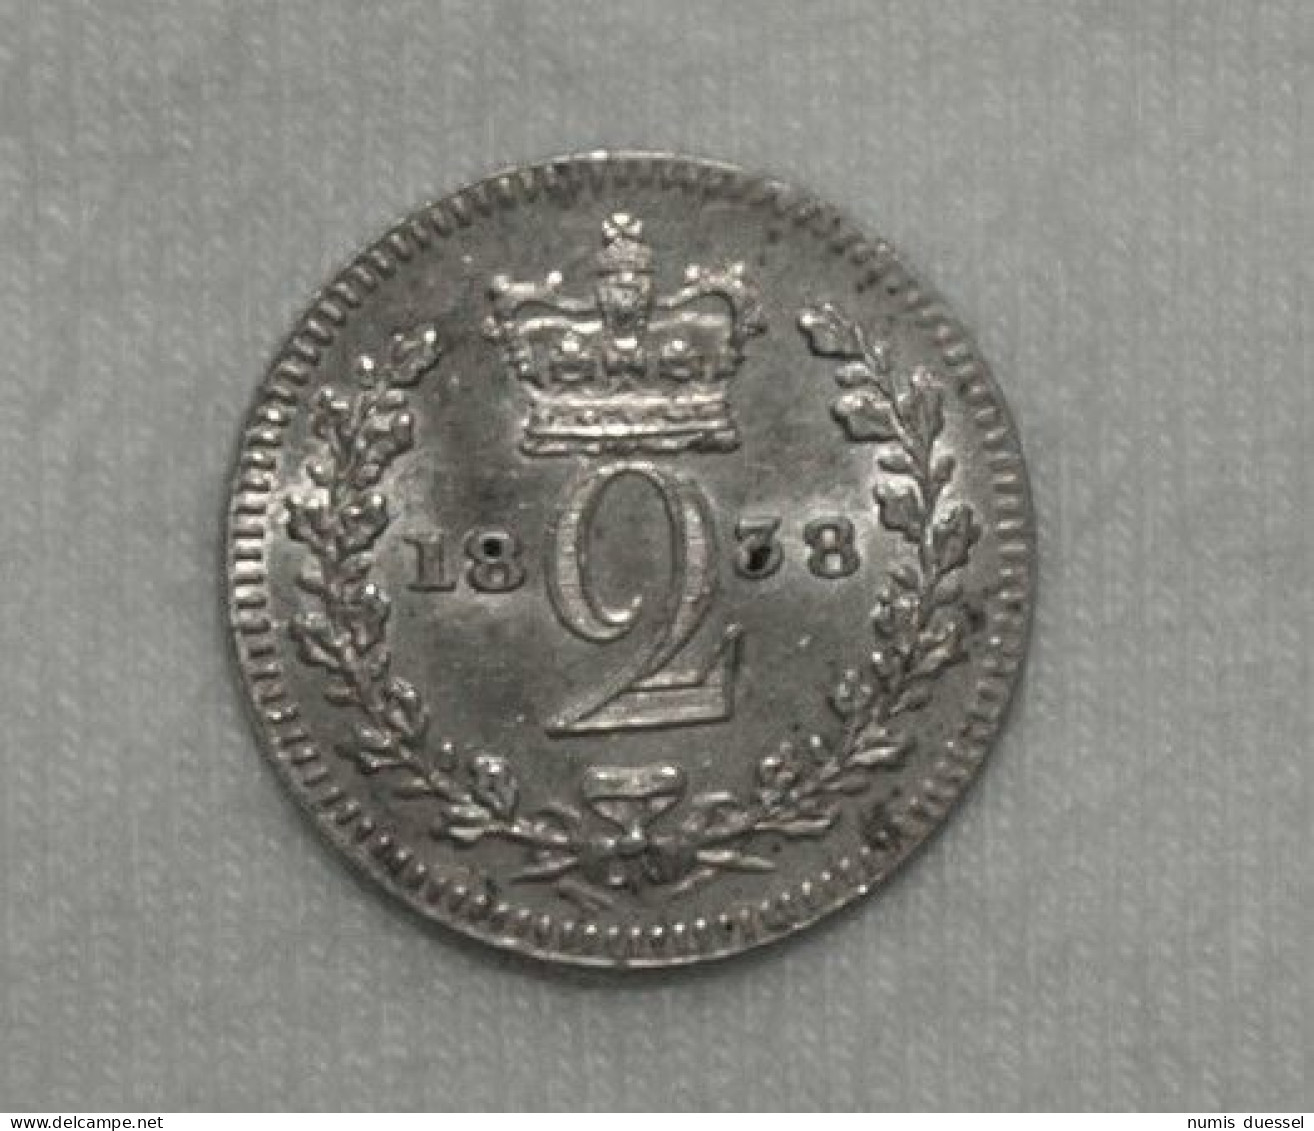 Silber/Silver Prooflike Maundy Großbritannien/Great Britain Victoria Young Head, 1838, 2 Pence UNC - Maundy Sets & Commemorative